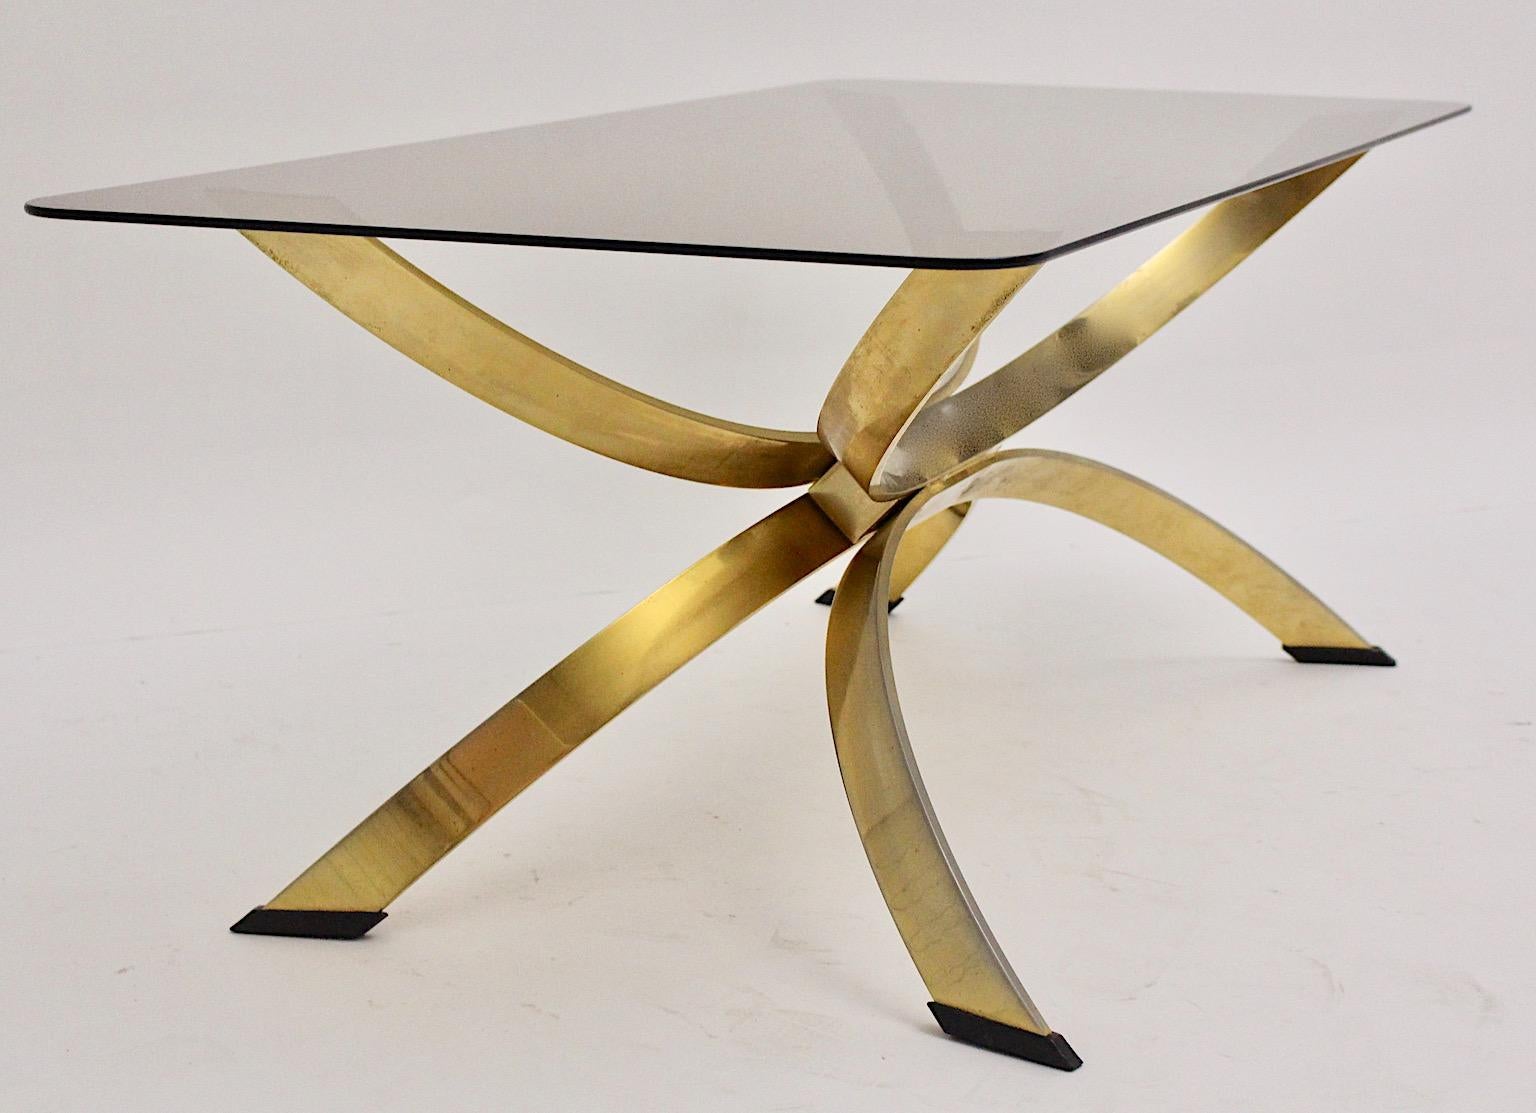 Brassed Metal Smoked Glass Sculptural Vintage Coffee Table Sofa Table 1970s For Sale 1